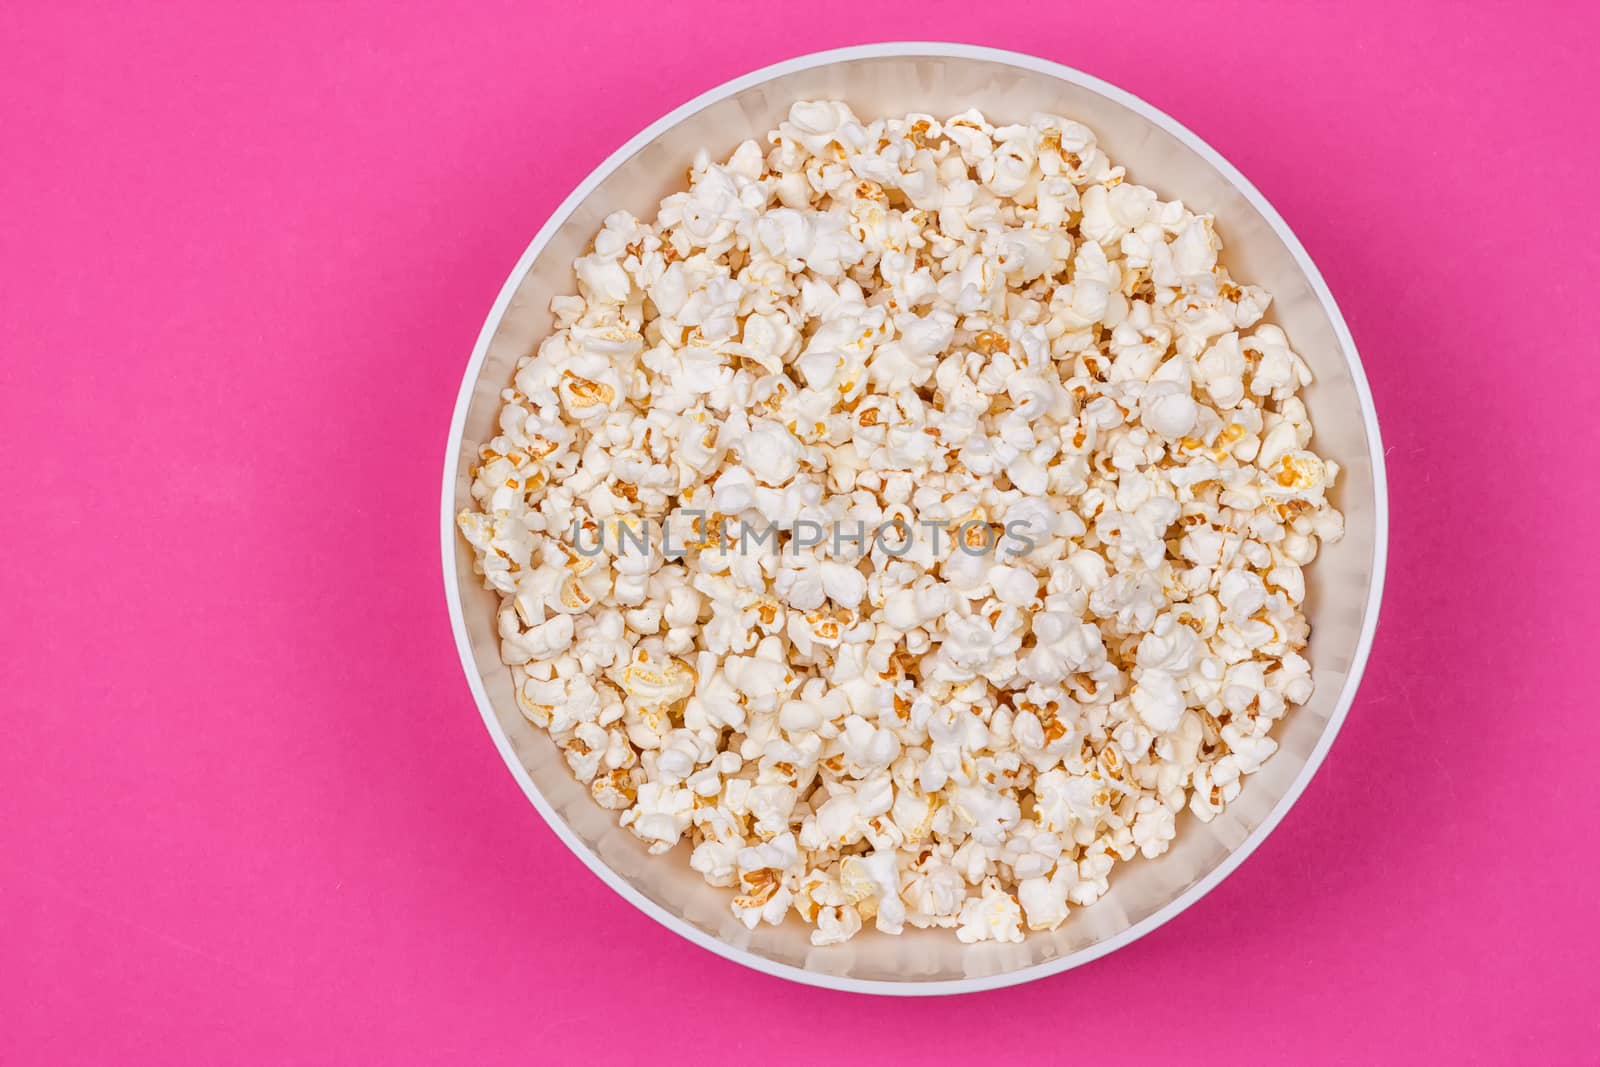 Bowl of Delicious Popcorn spilling onto a pink background